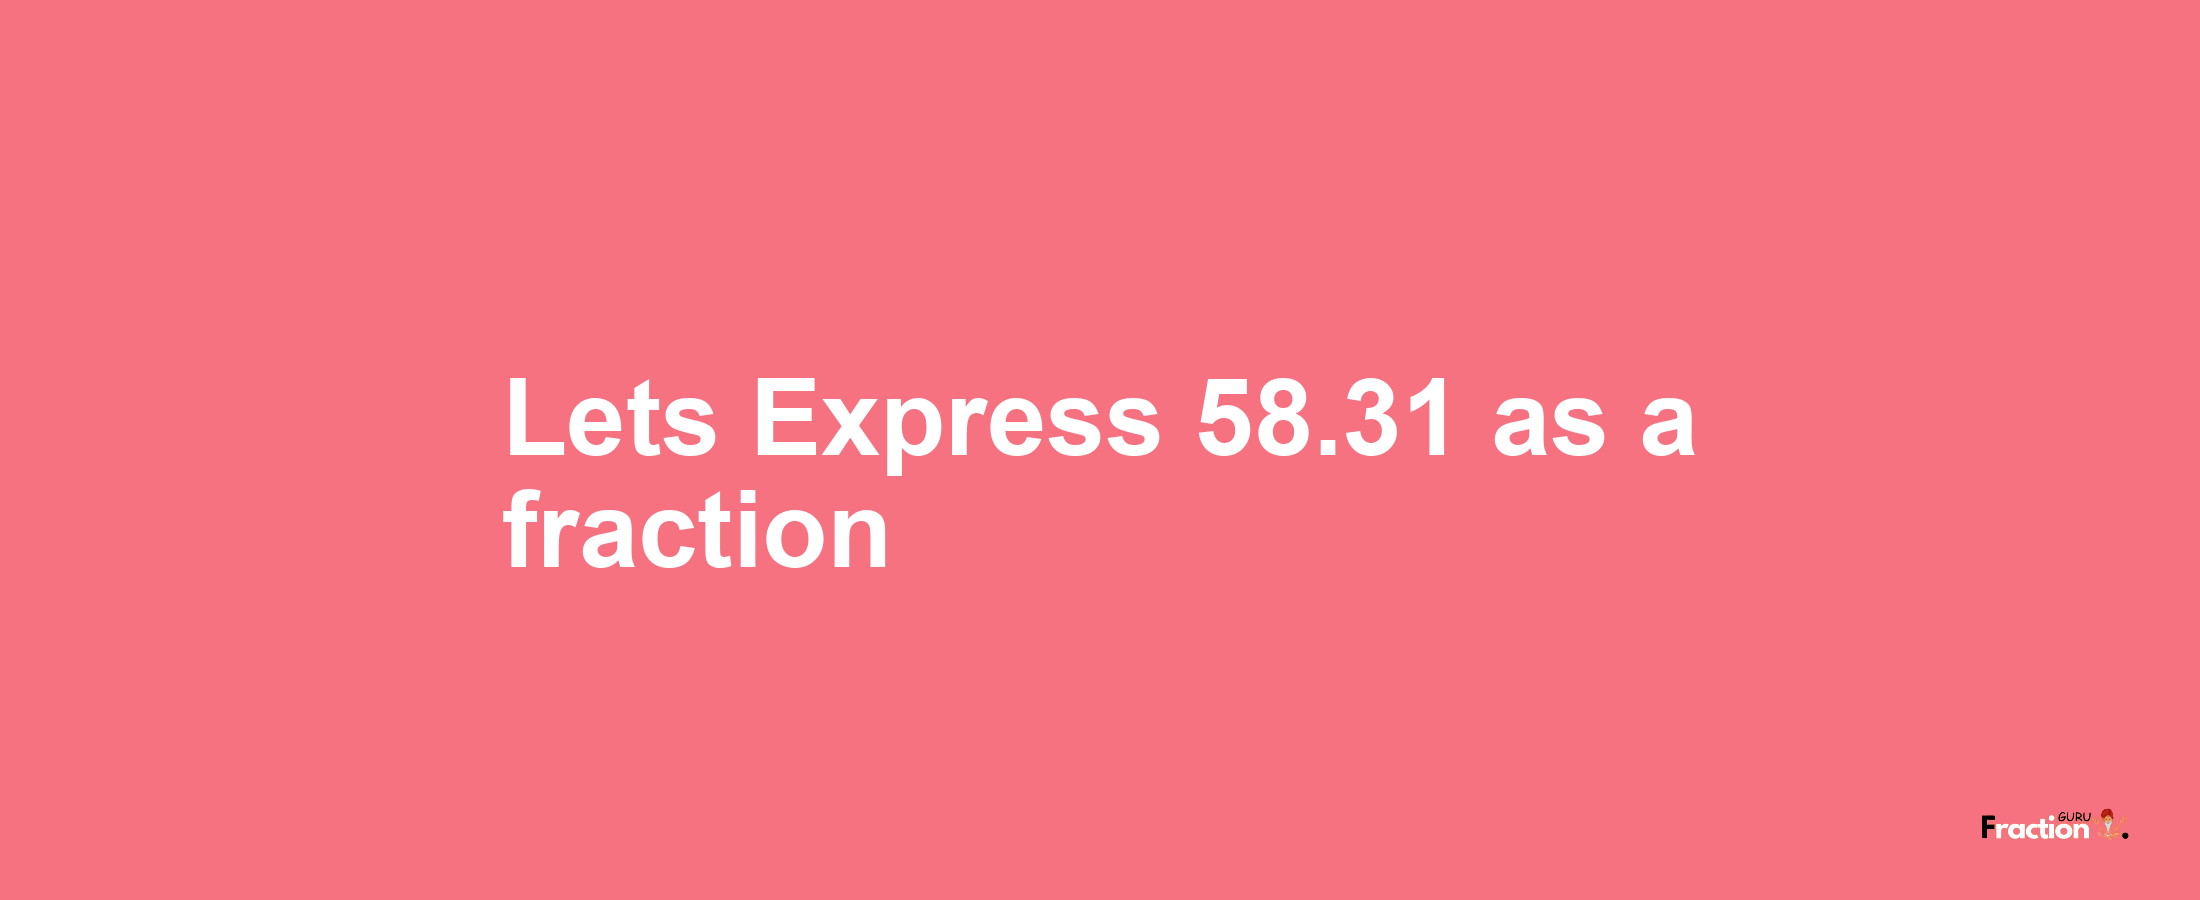 Lets Express 58.31 as afraction